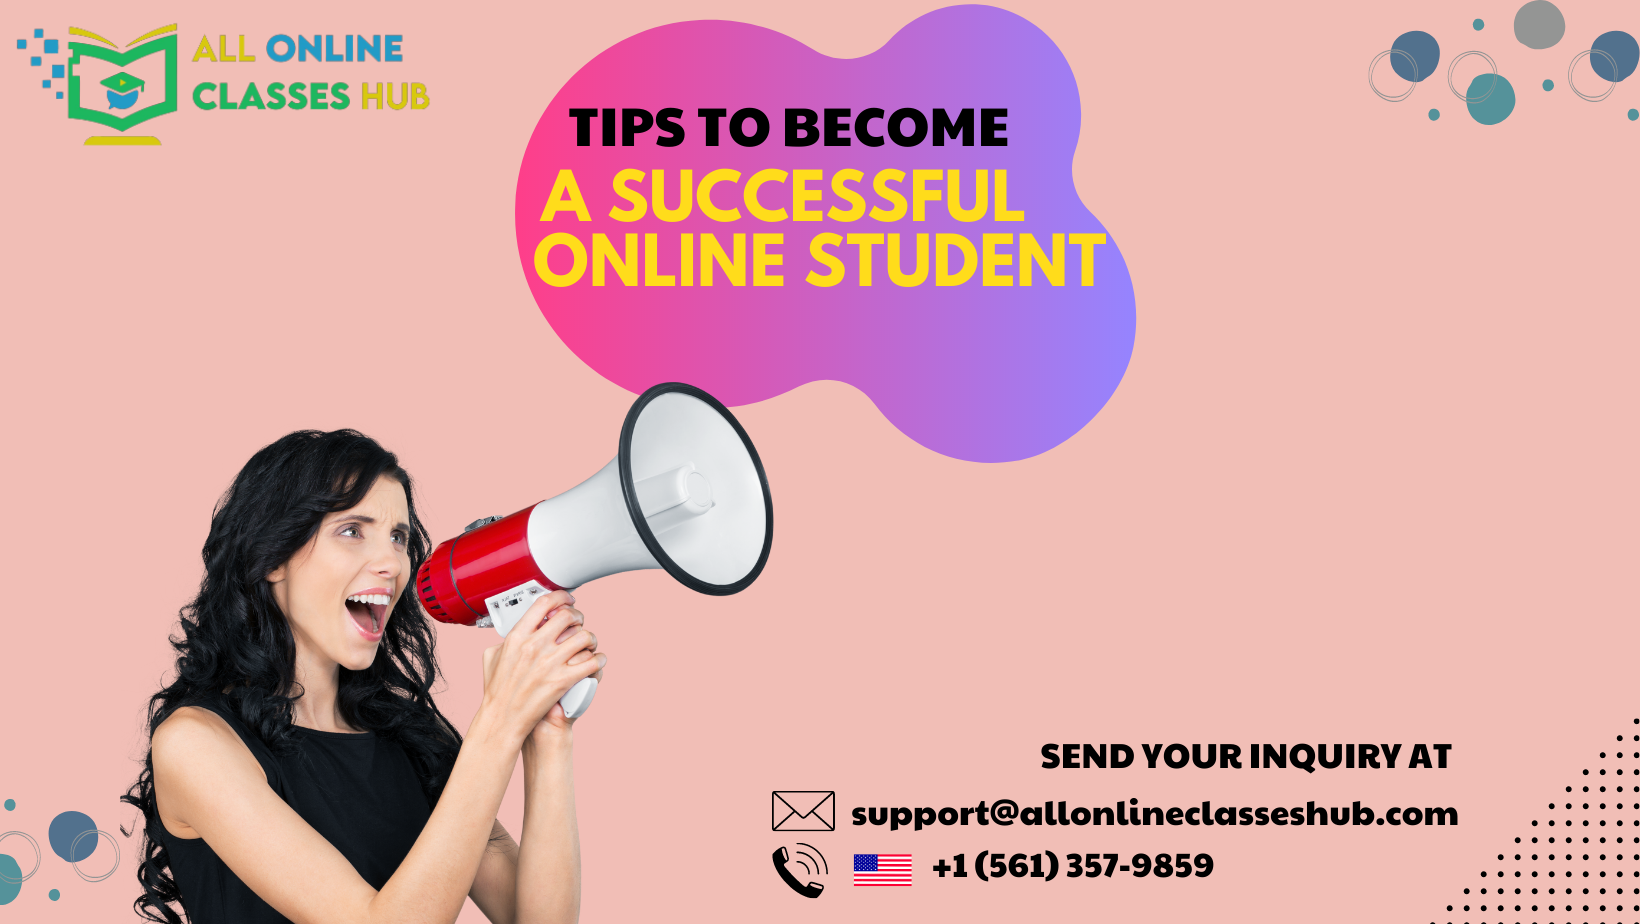 Tips To Become a Successful Online Student